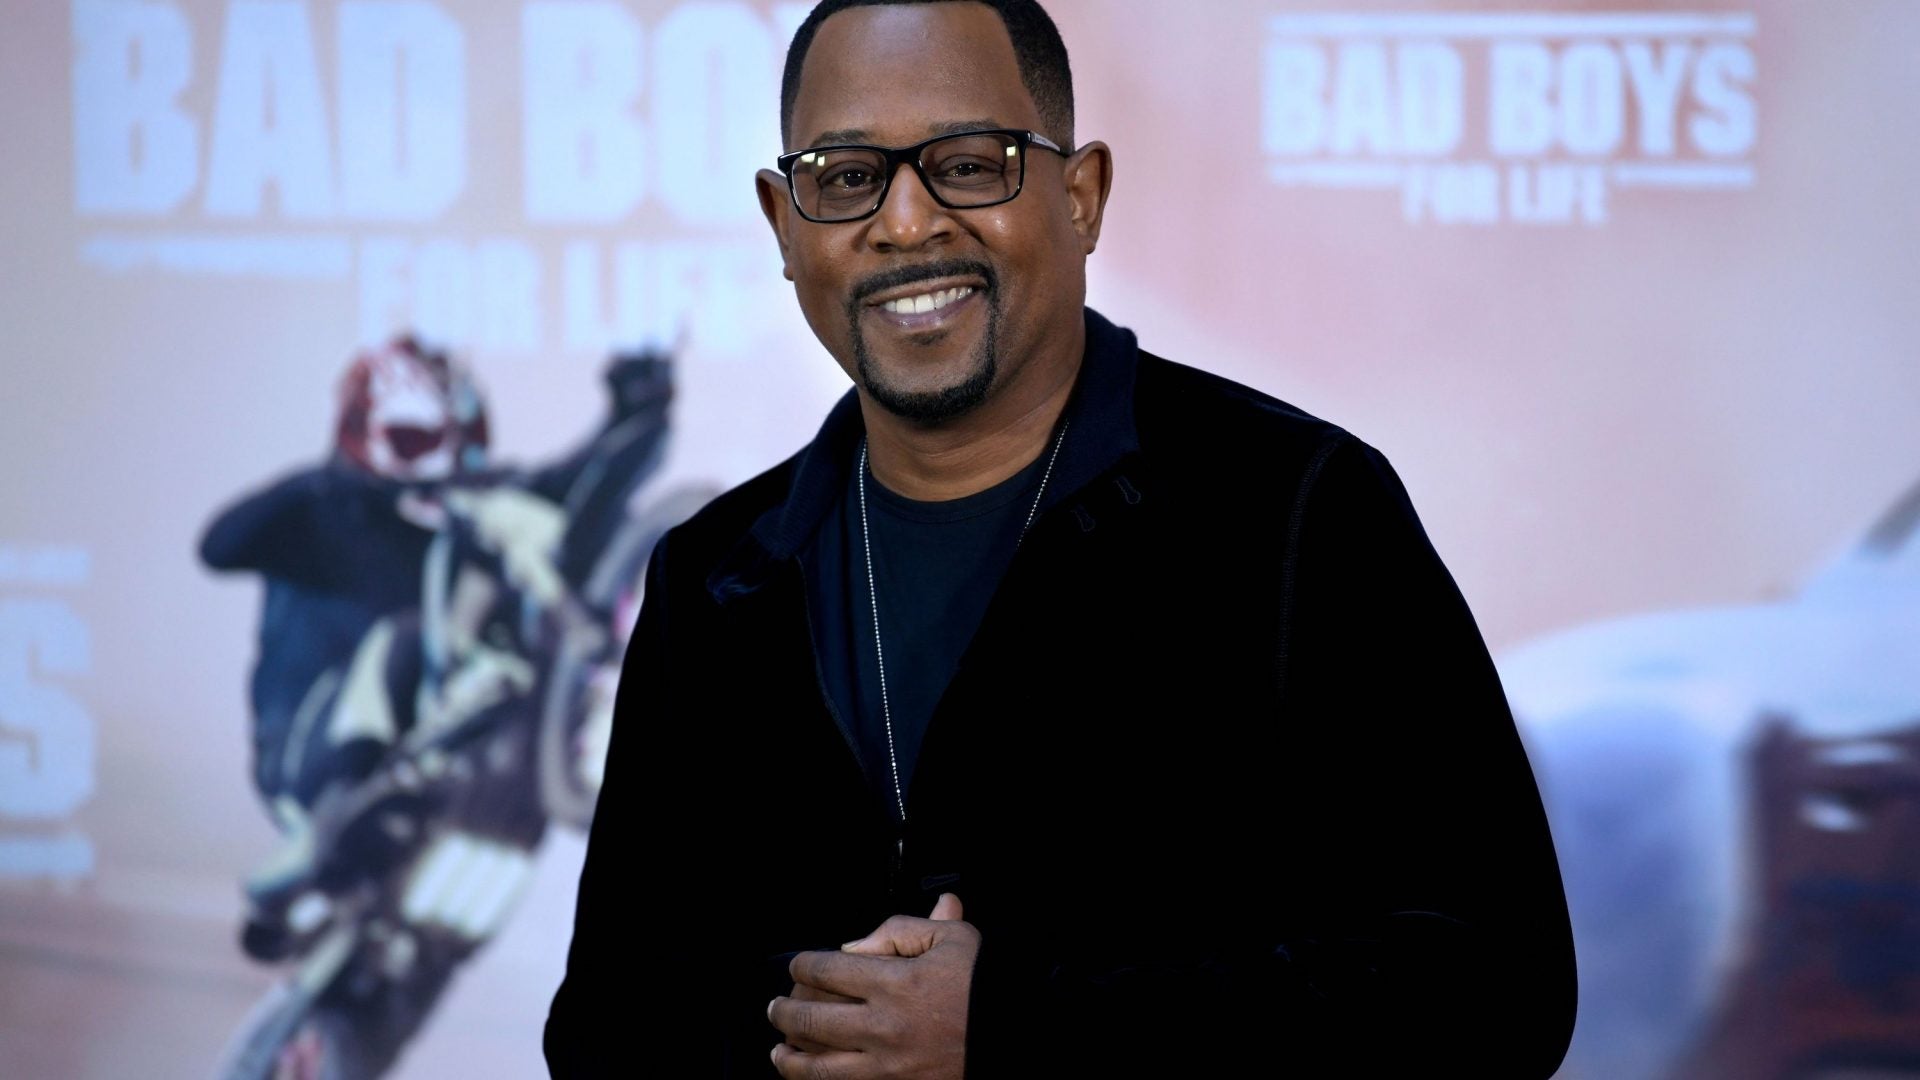 Martin Lawrence Finally Reveals He Ended 'Martin' After 1997 Sexual Harassment Lawsuit